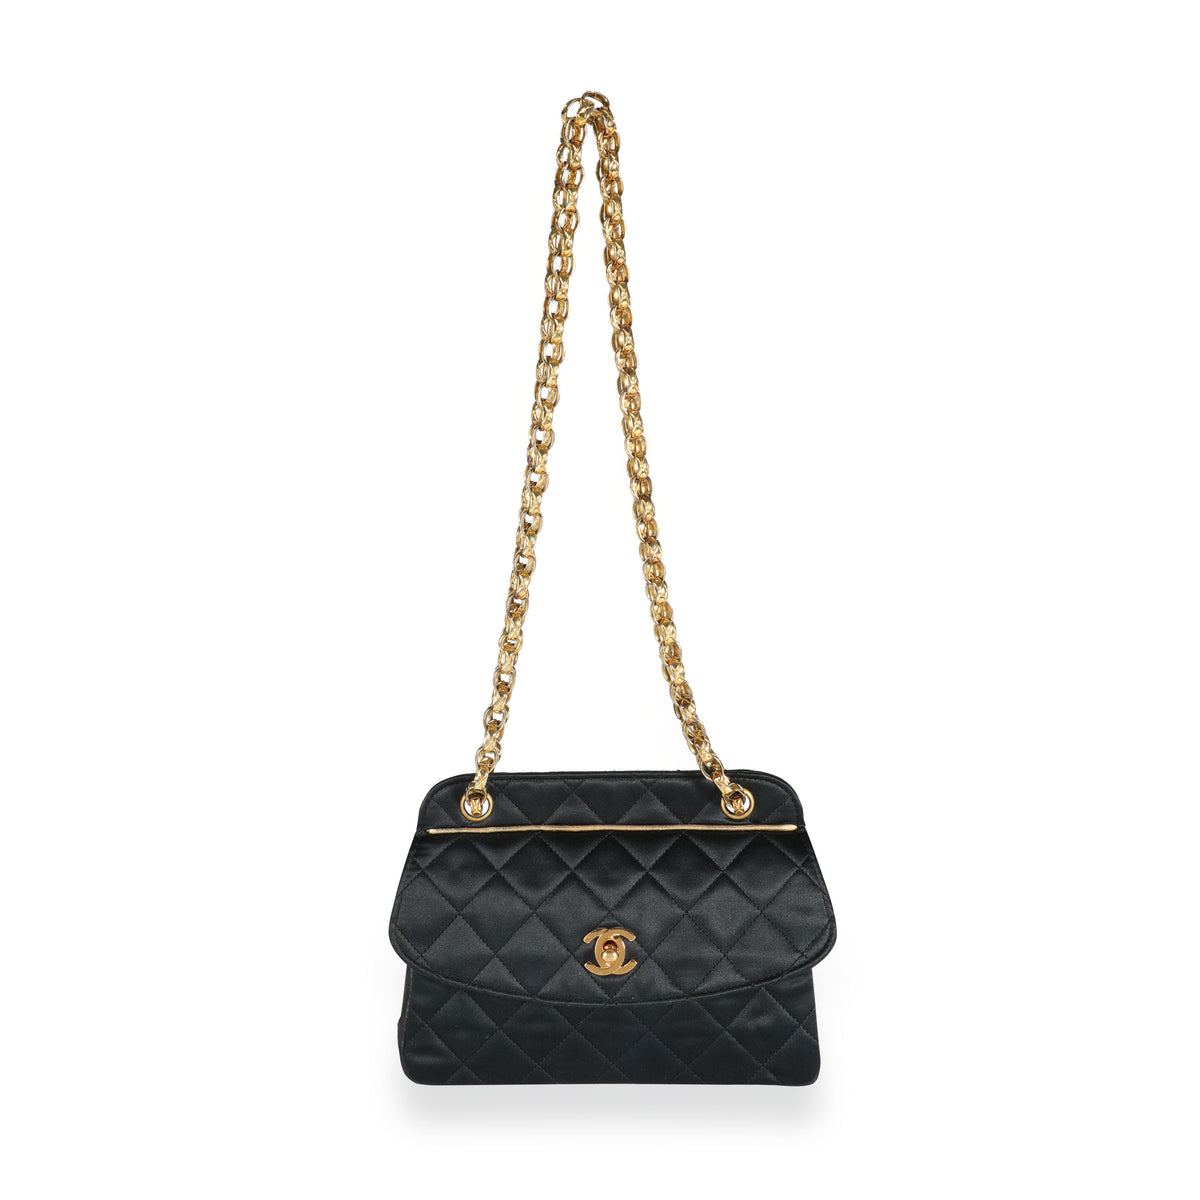 Chanel Vintage Black Quilted Satin Mini Flap Bag with Pouch